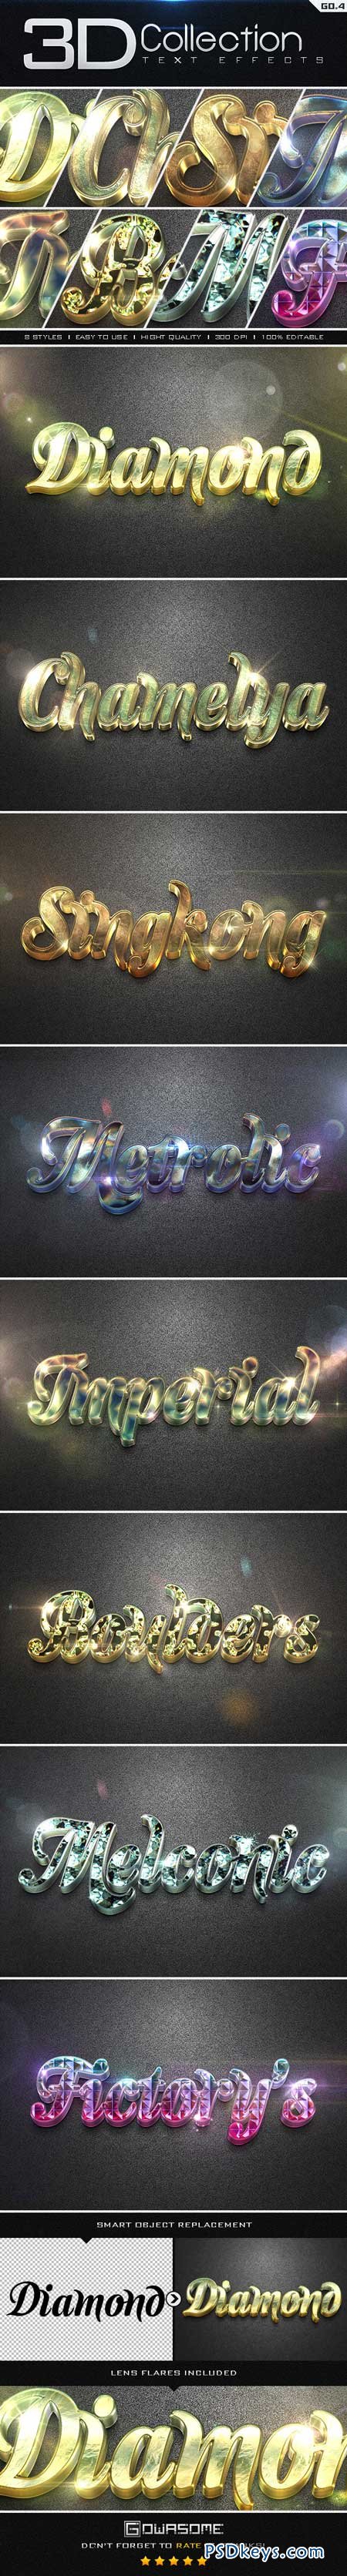 3D Collection Text Effects GO.4 8908225